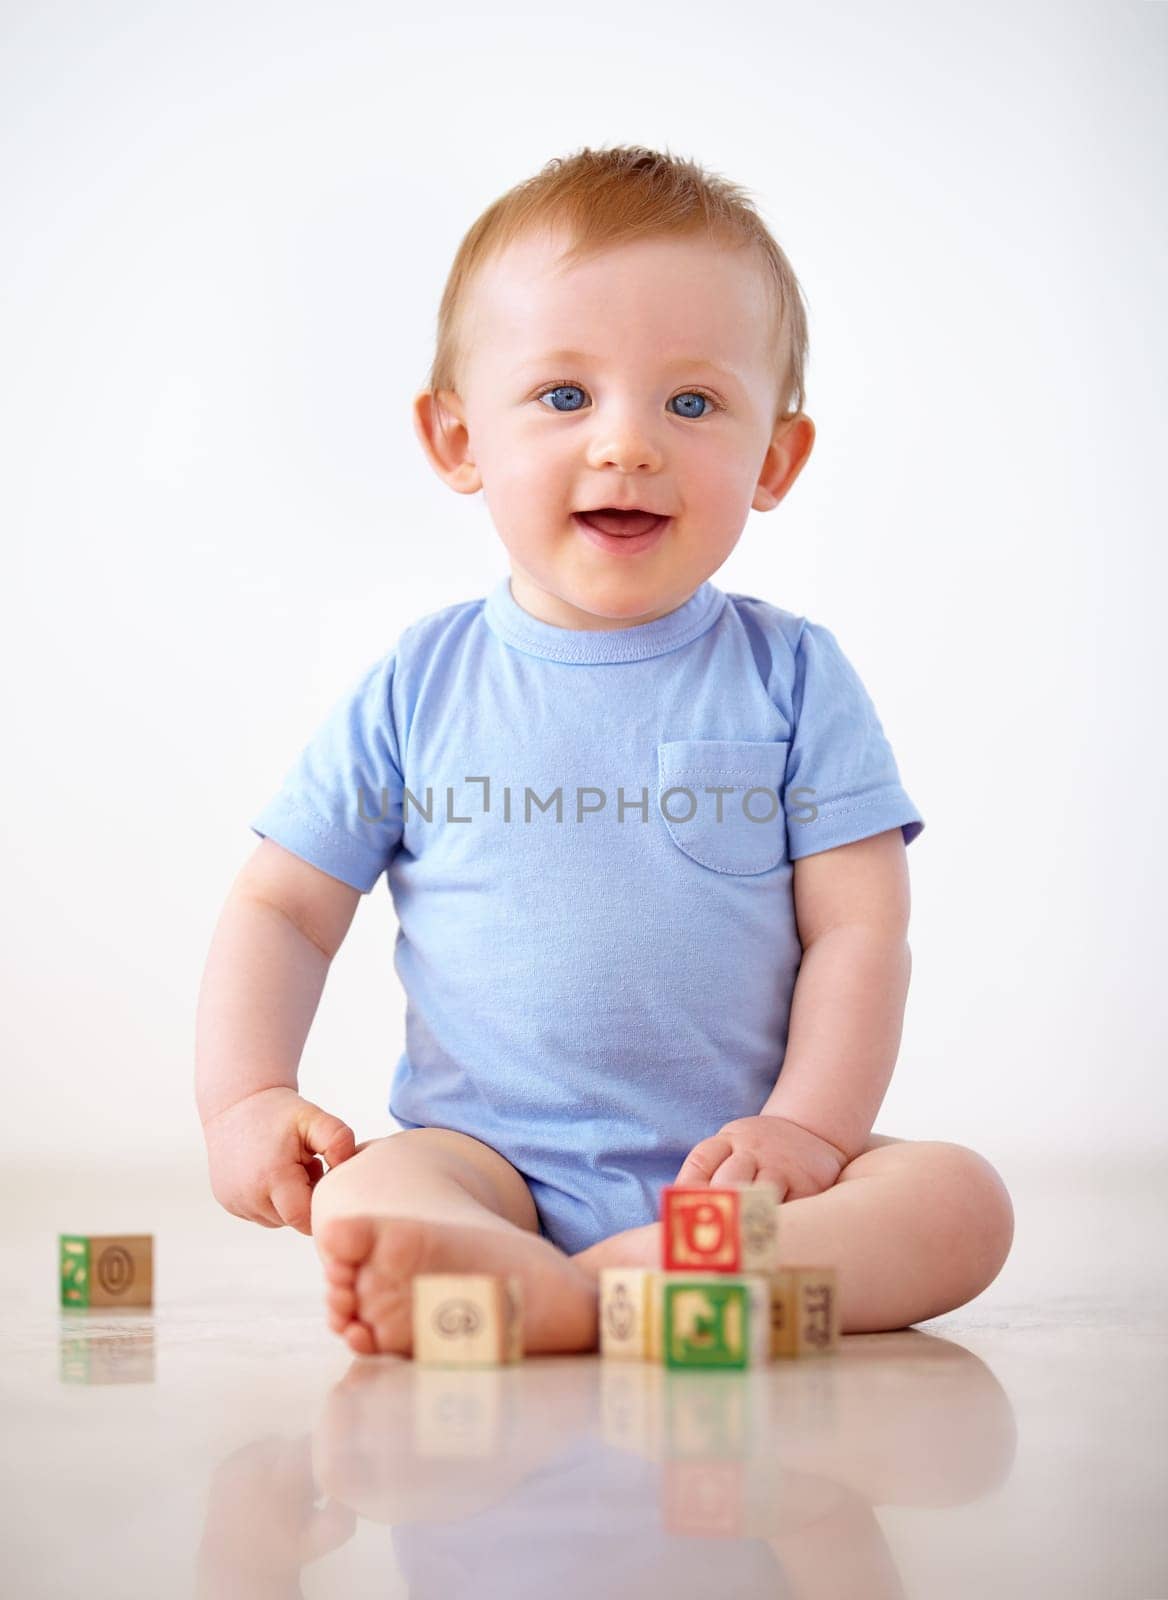 Happy, baby with toy blocks and playing against a white background with smile. Child development or learning, happiness or health wellness and boy toddler play against a studio backdrop on floor by YuriArcurs